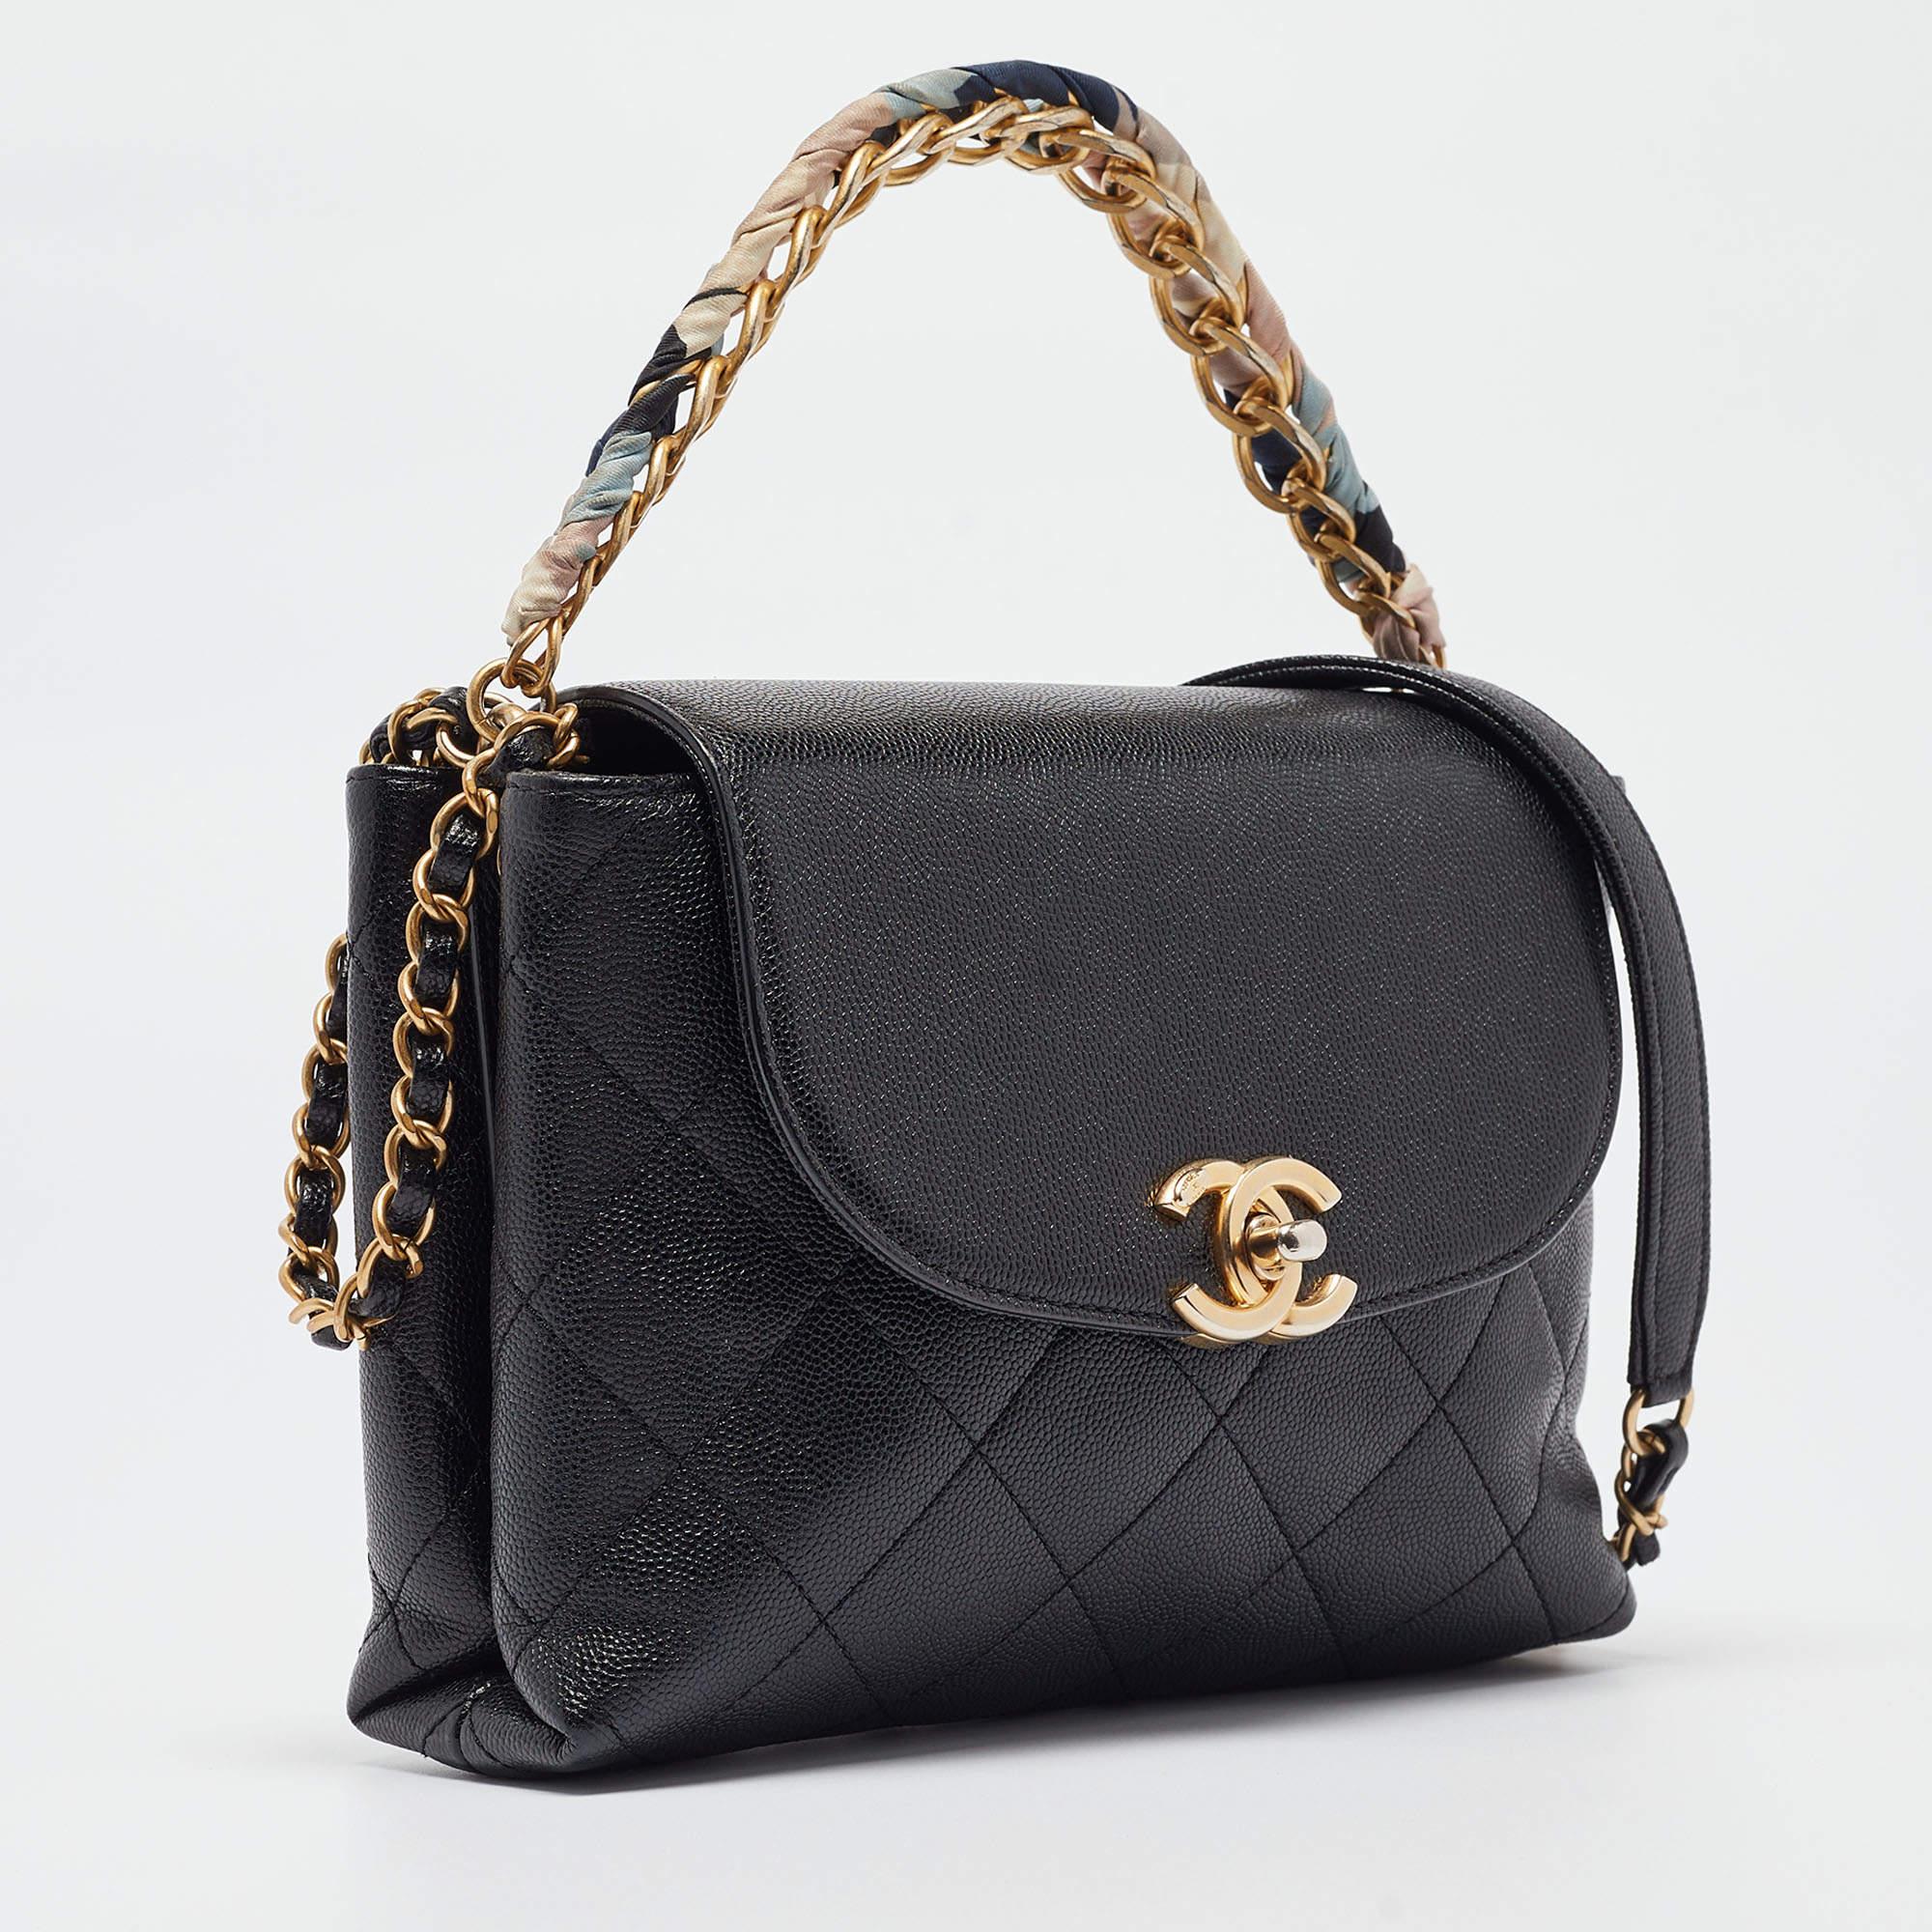 Chanel Black Quilted Leather CC Chain Scarf Top Handle Bag In Good Condition For Sale In Dubai, Al Qouz 2